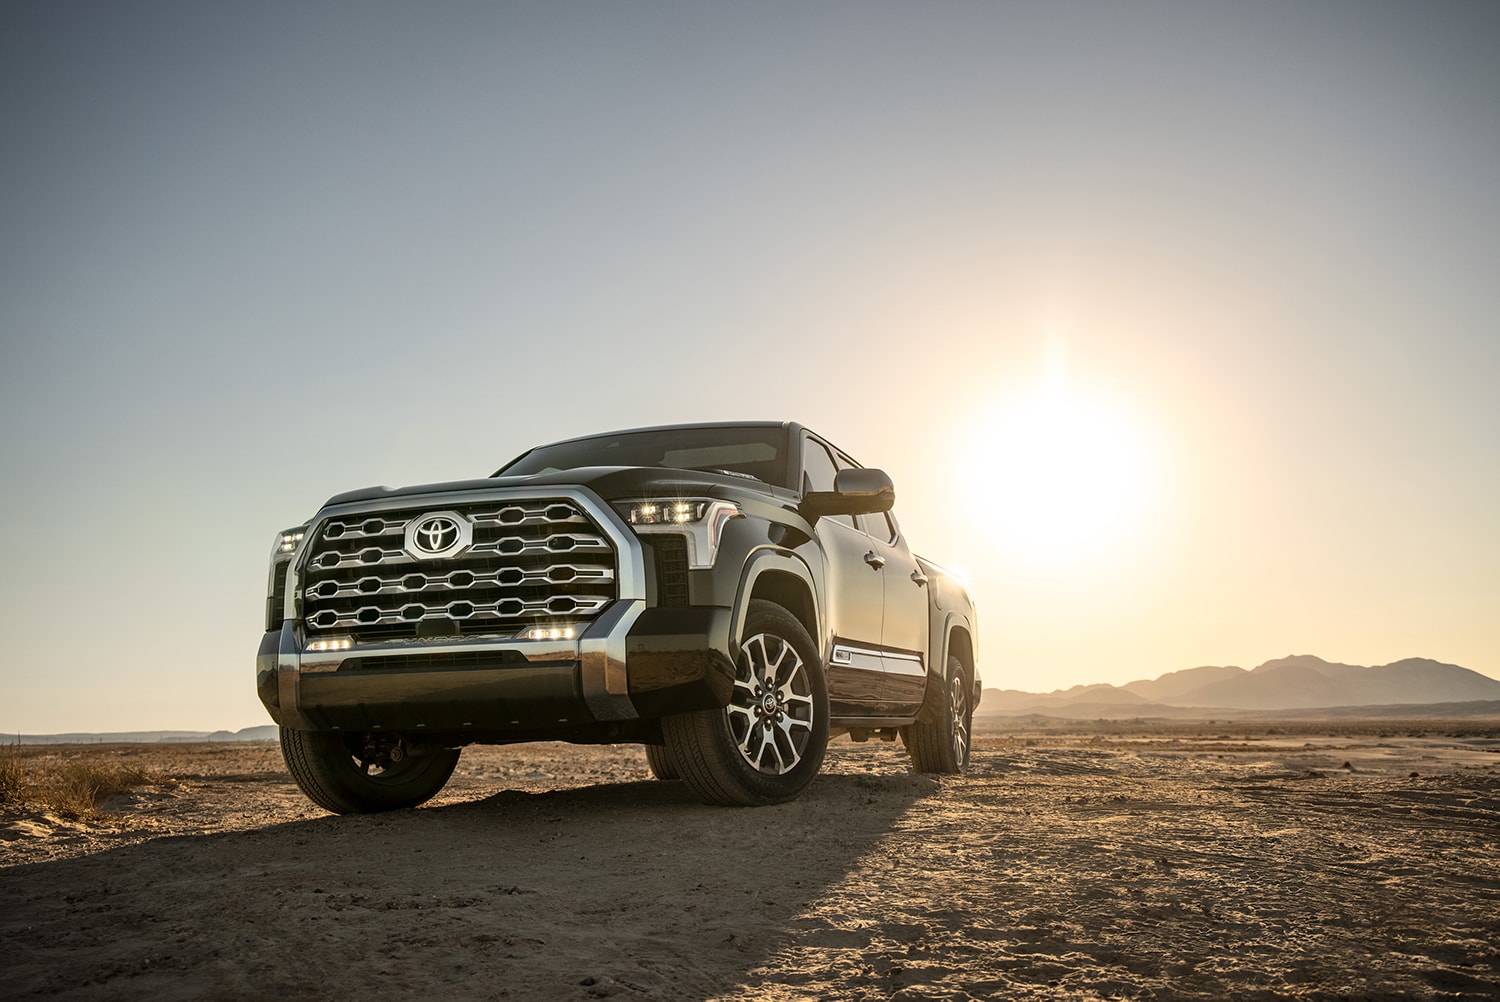 The All-New 2022 Toyota Tundra at Bobby Rahal Toyota in Mechanicsburg, PA | 2022 Toyota Tundra parked in the desert